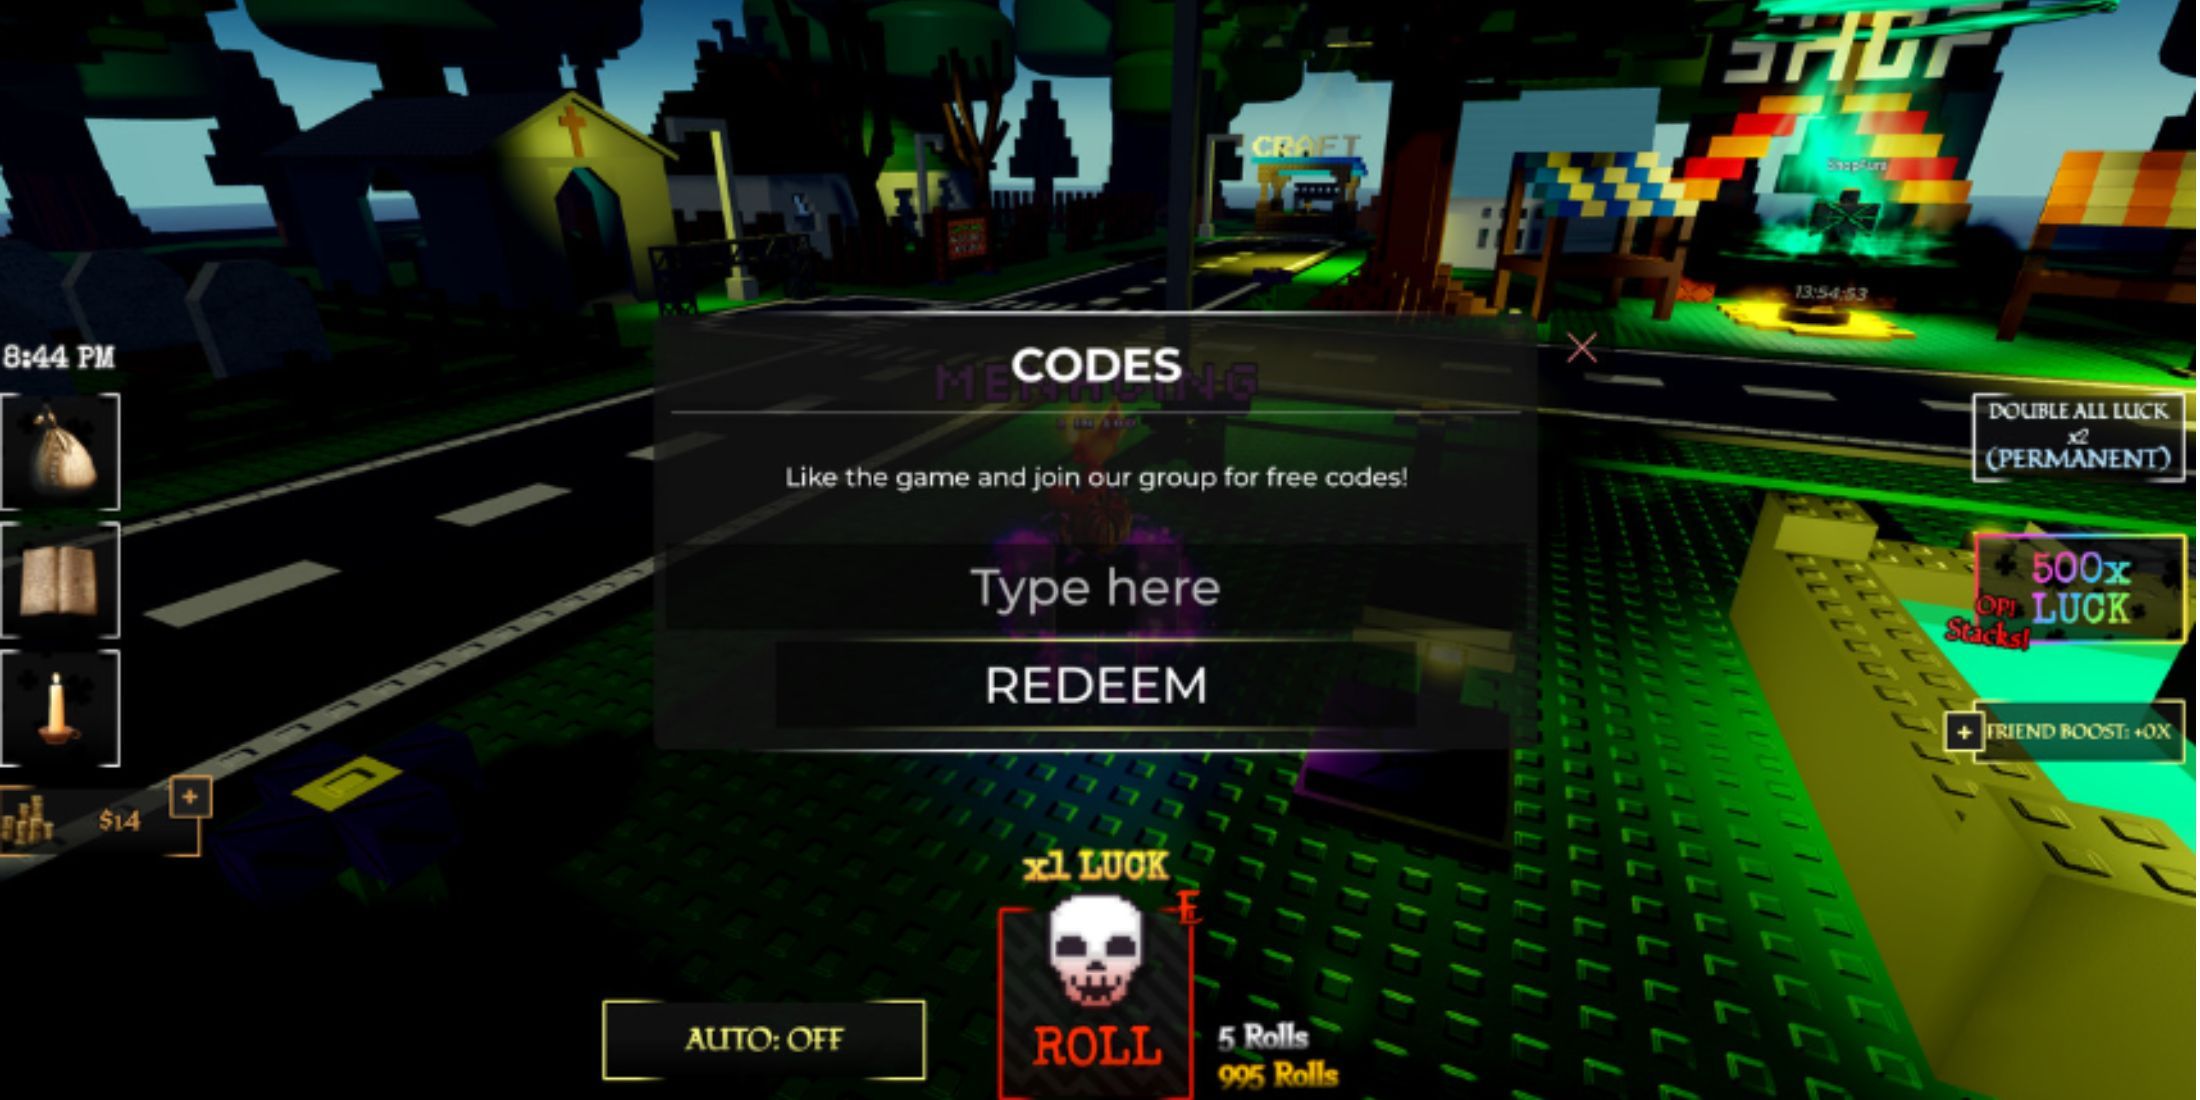 Horrors RNG the codes tab